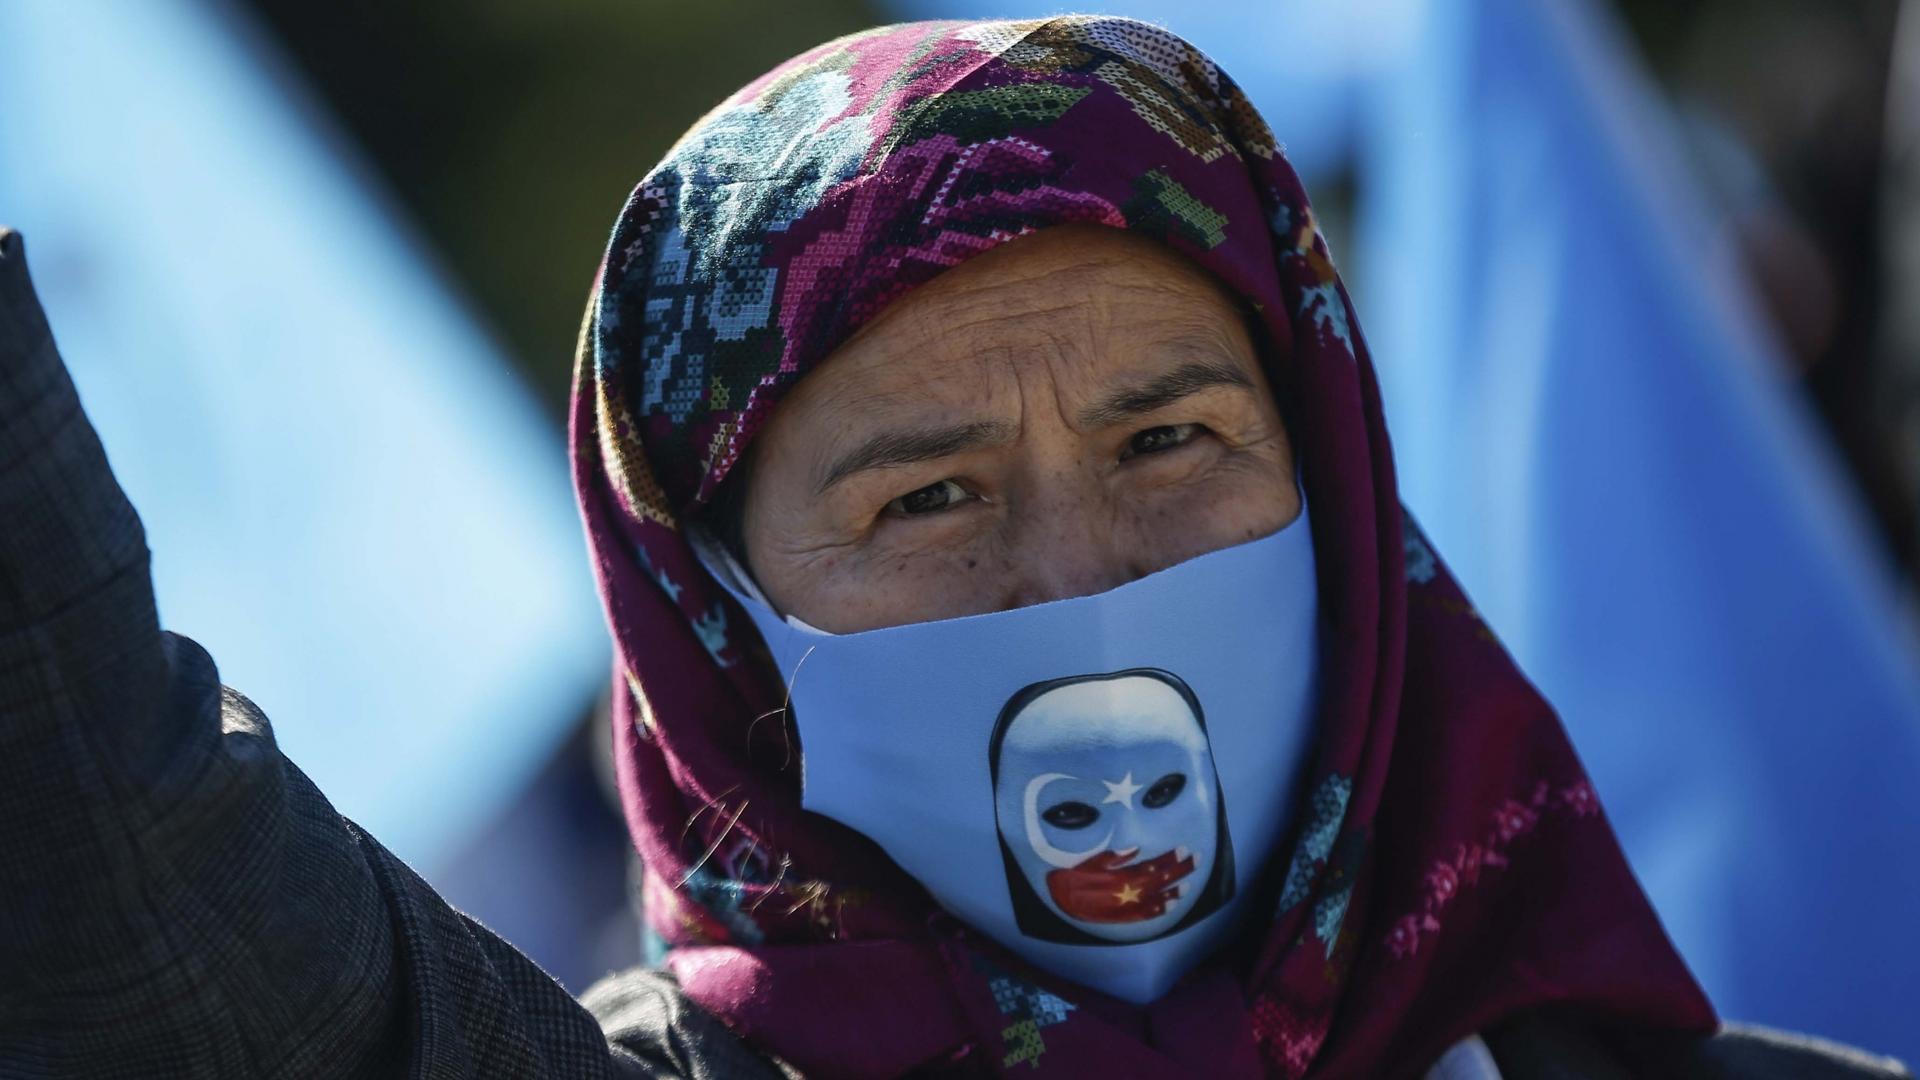 A protester from the Uighur community living in Turkey, participates in a protest in Istanbul, Oct. 1, 2020, against what they allege is oppression by the Chinese government to Muslim Uighurs in far-western Xinjiang province. 